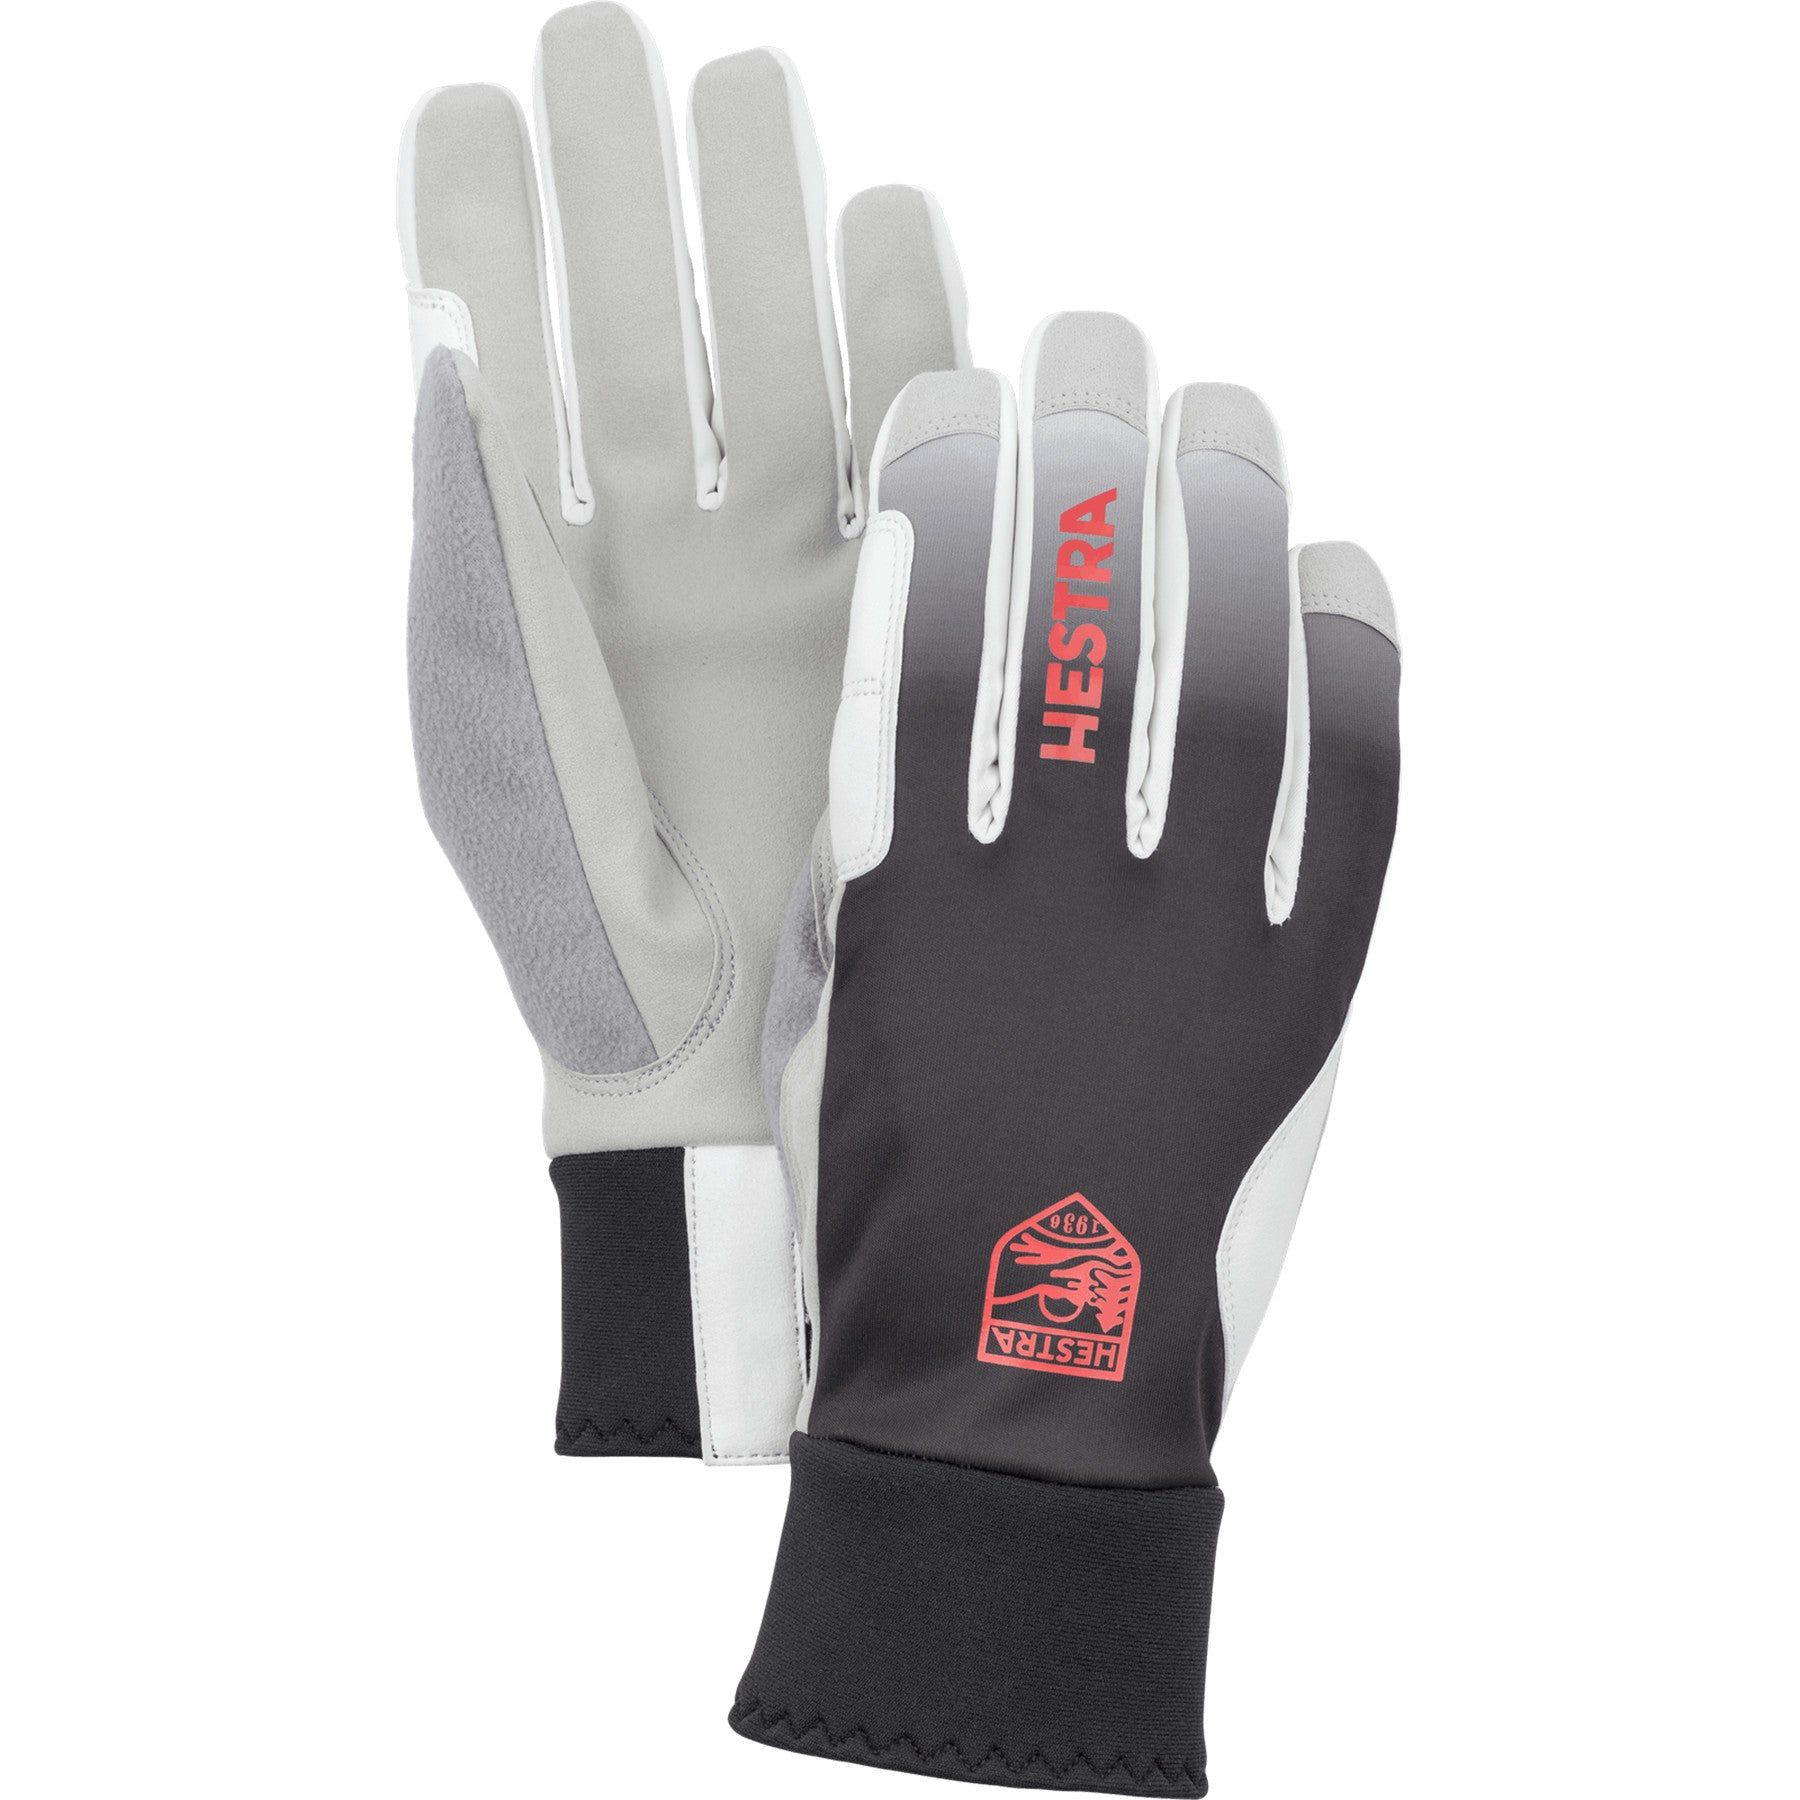 Hestra XC Race Fit Glove